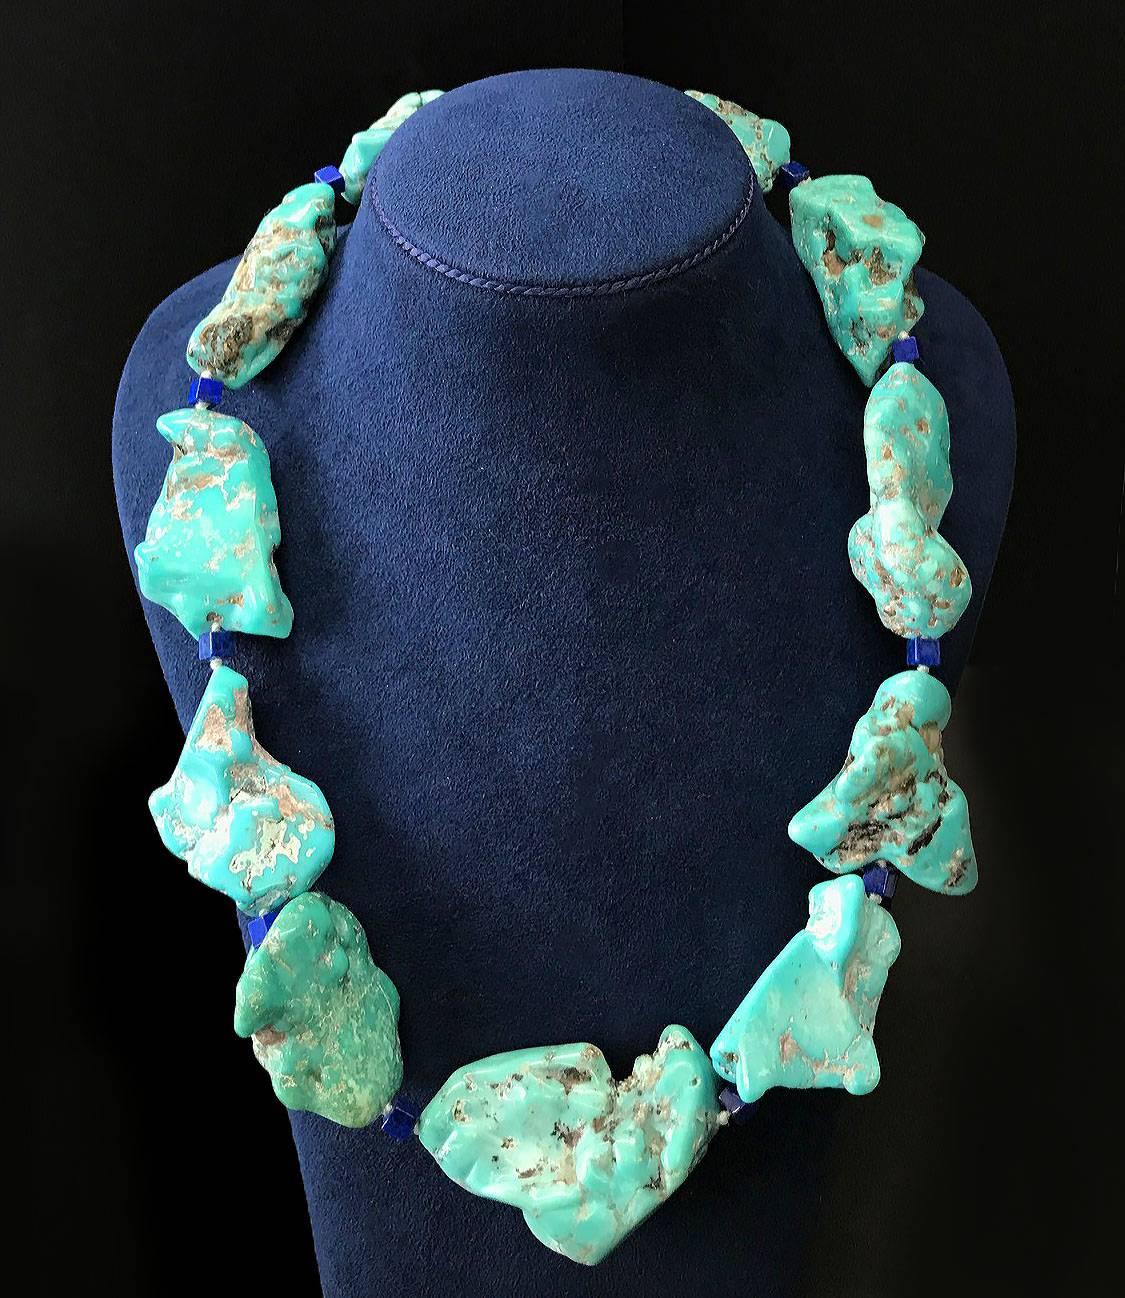 This one of a kind necklace features 11 large Turquoise nuggets and lapis lazuli cube links with ring and toggle clasp in 18kt yellow gold.